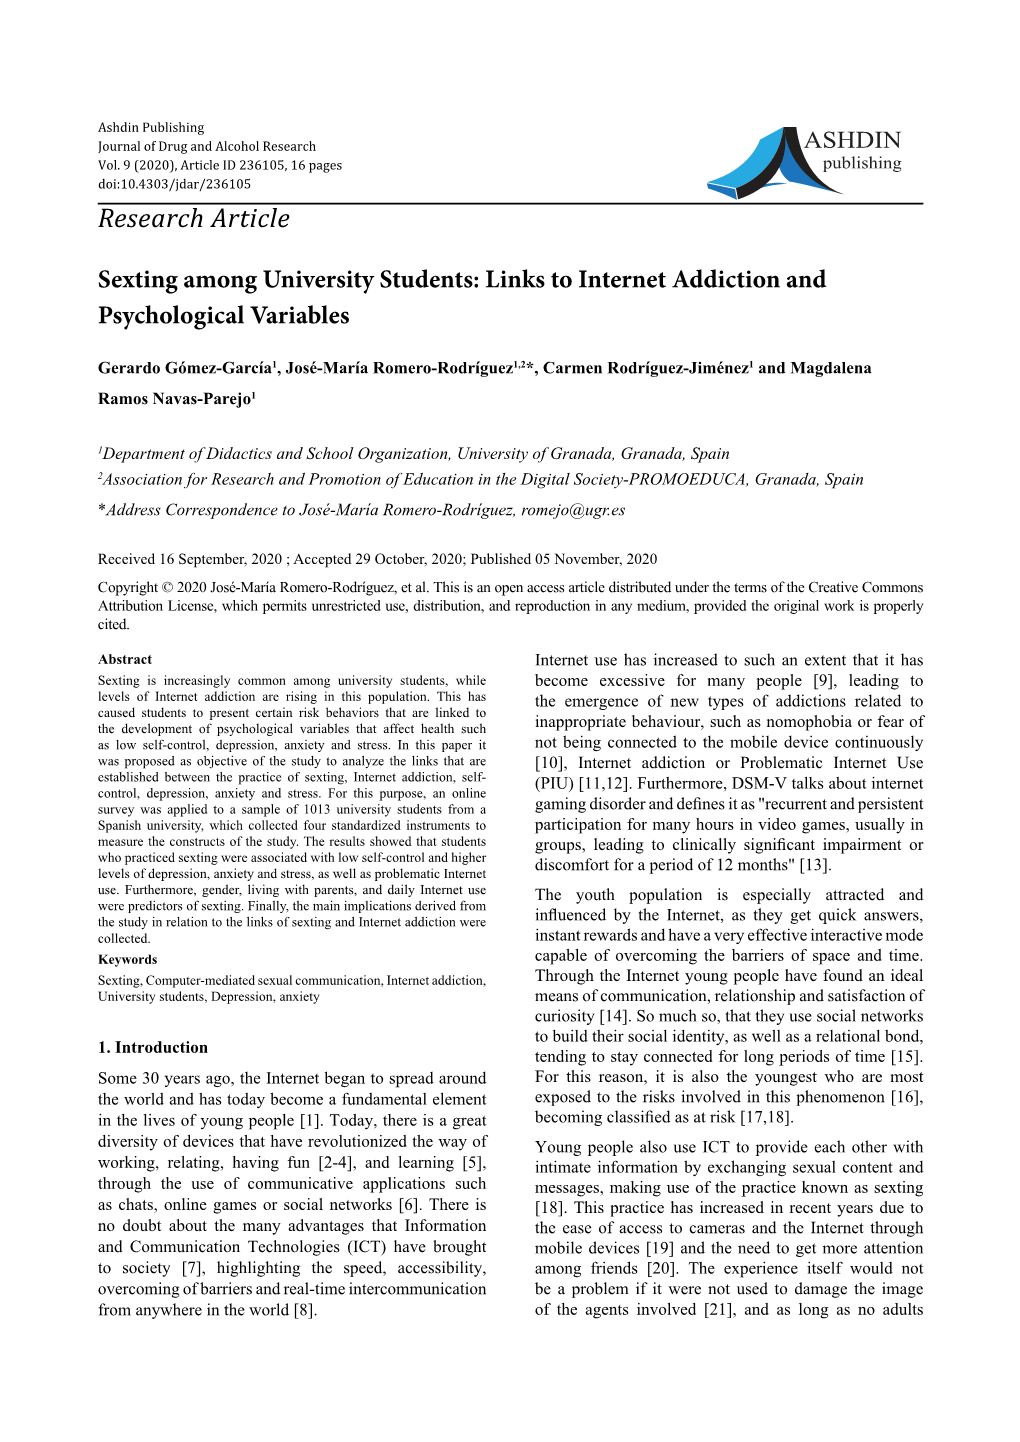 Sexting Among University Students: Links to Internet Addiction and Psychological Variables